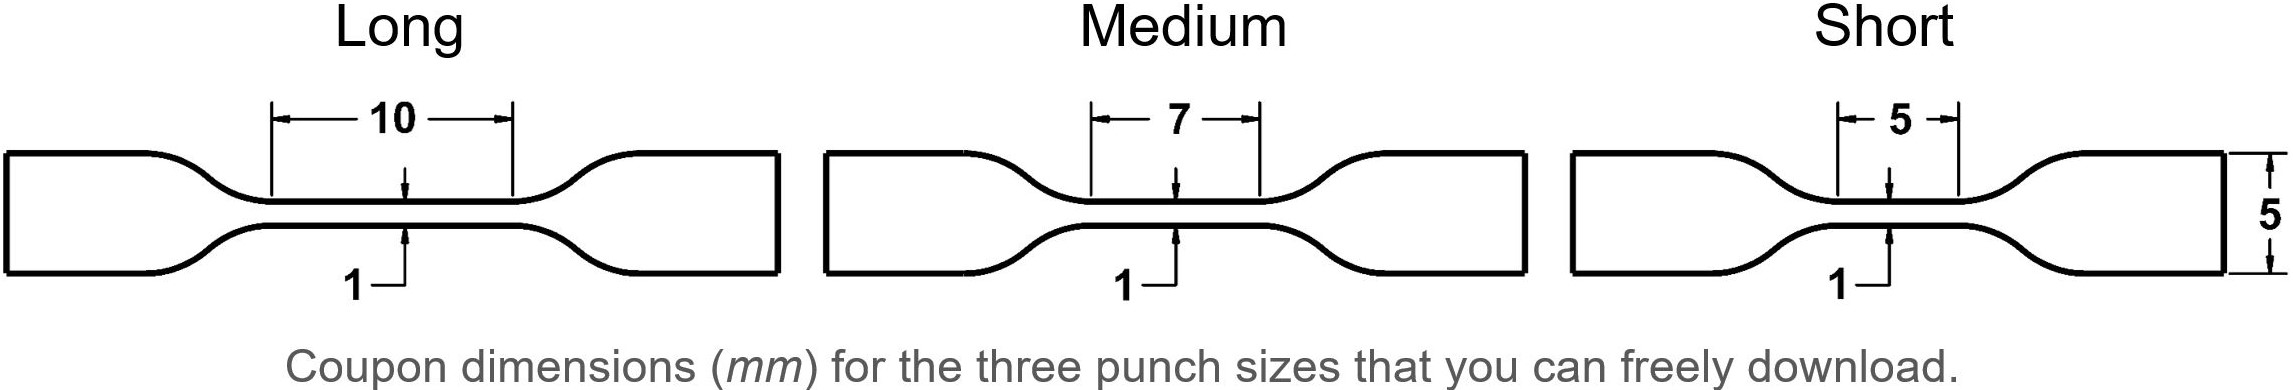 coupon dimensions for the three punch sizes that you can freely download